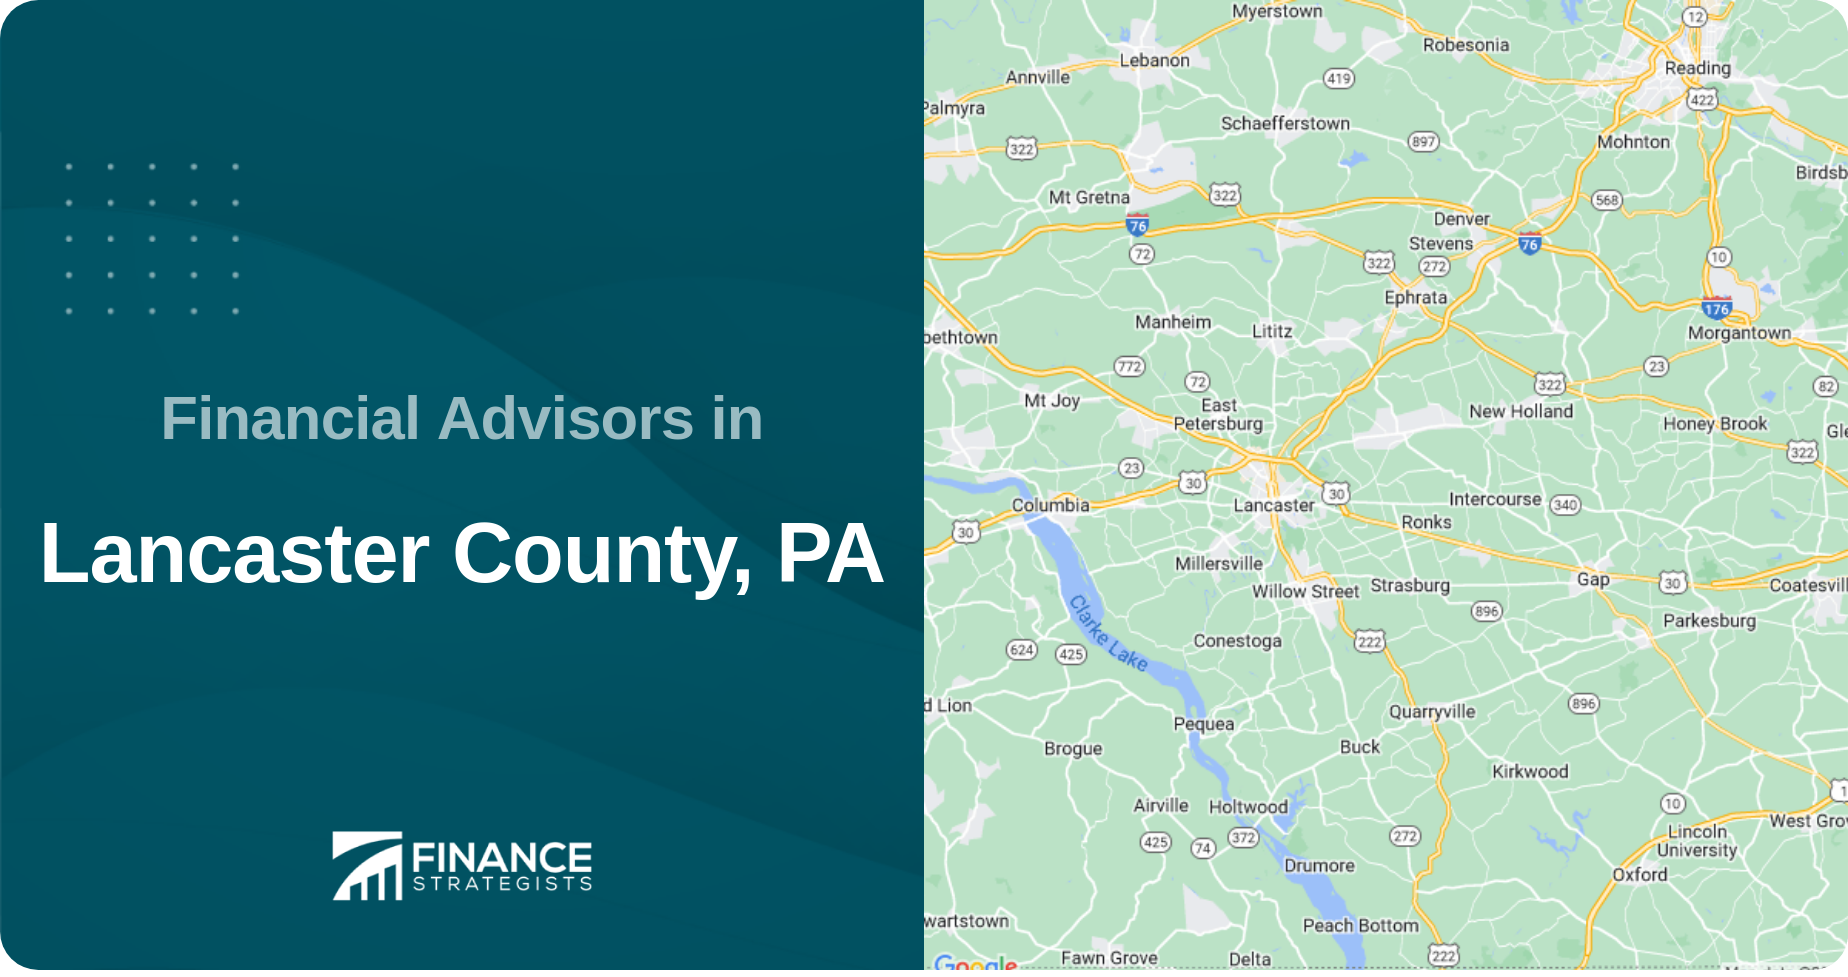 Financial Advisors in Lancaster County, PA